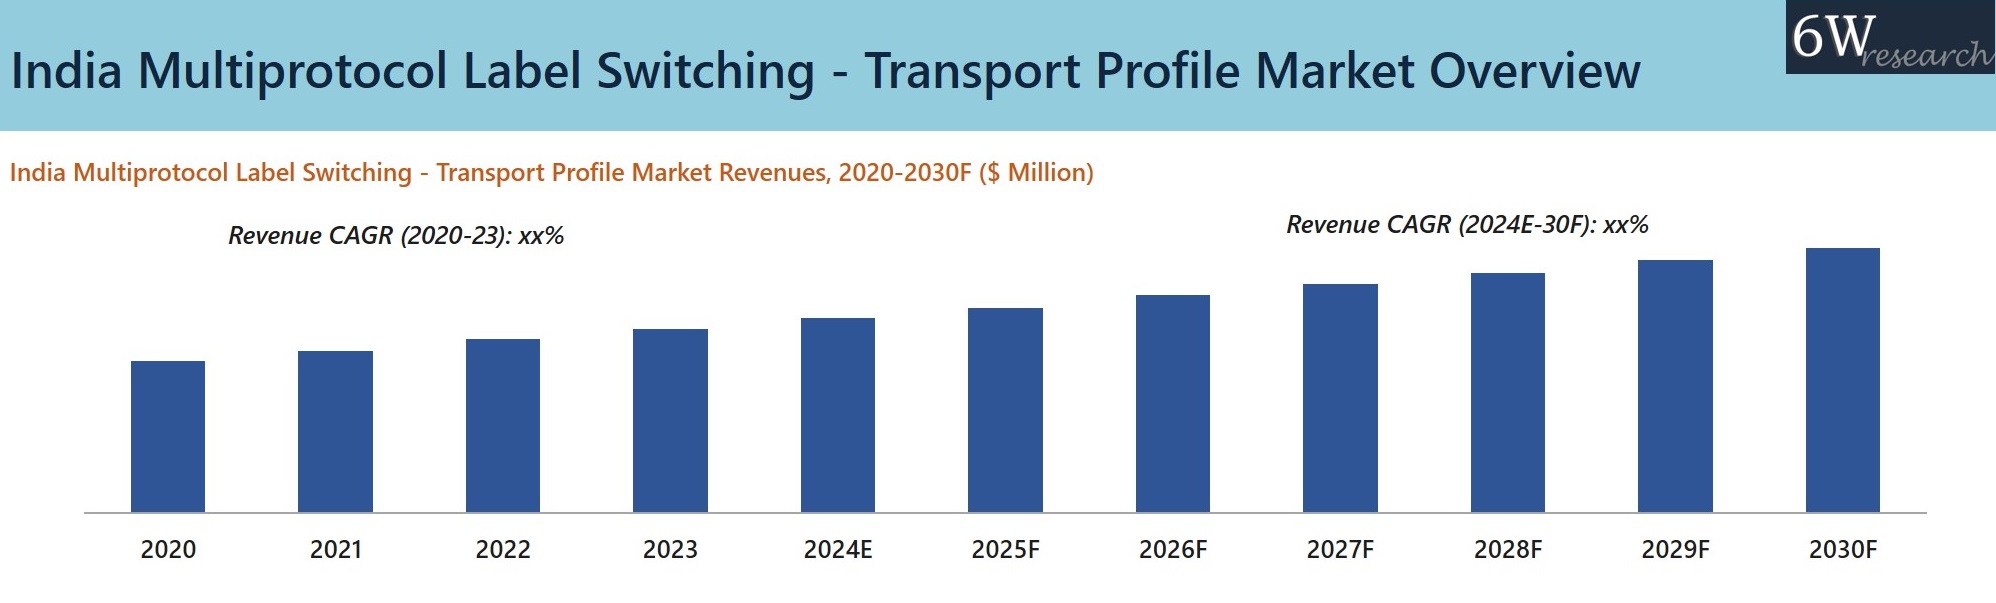 India Multiprotocol Label Switching-Transport Profile Market Overview